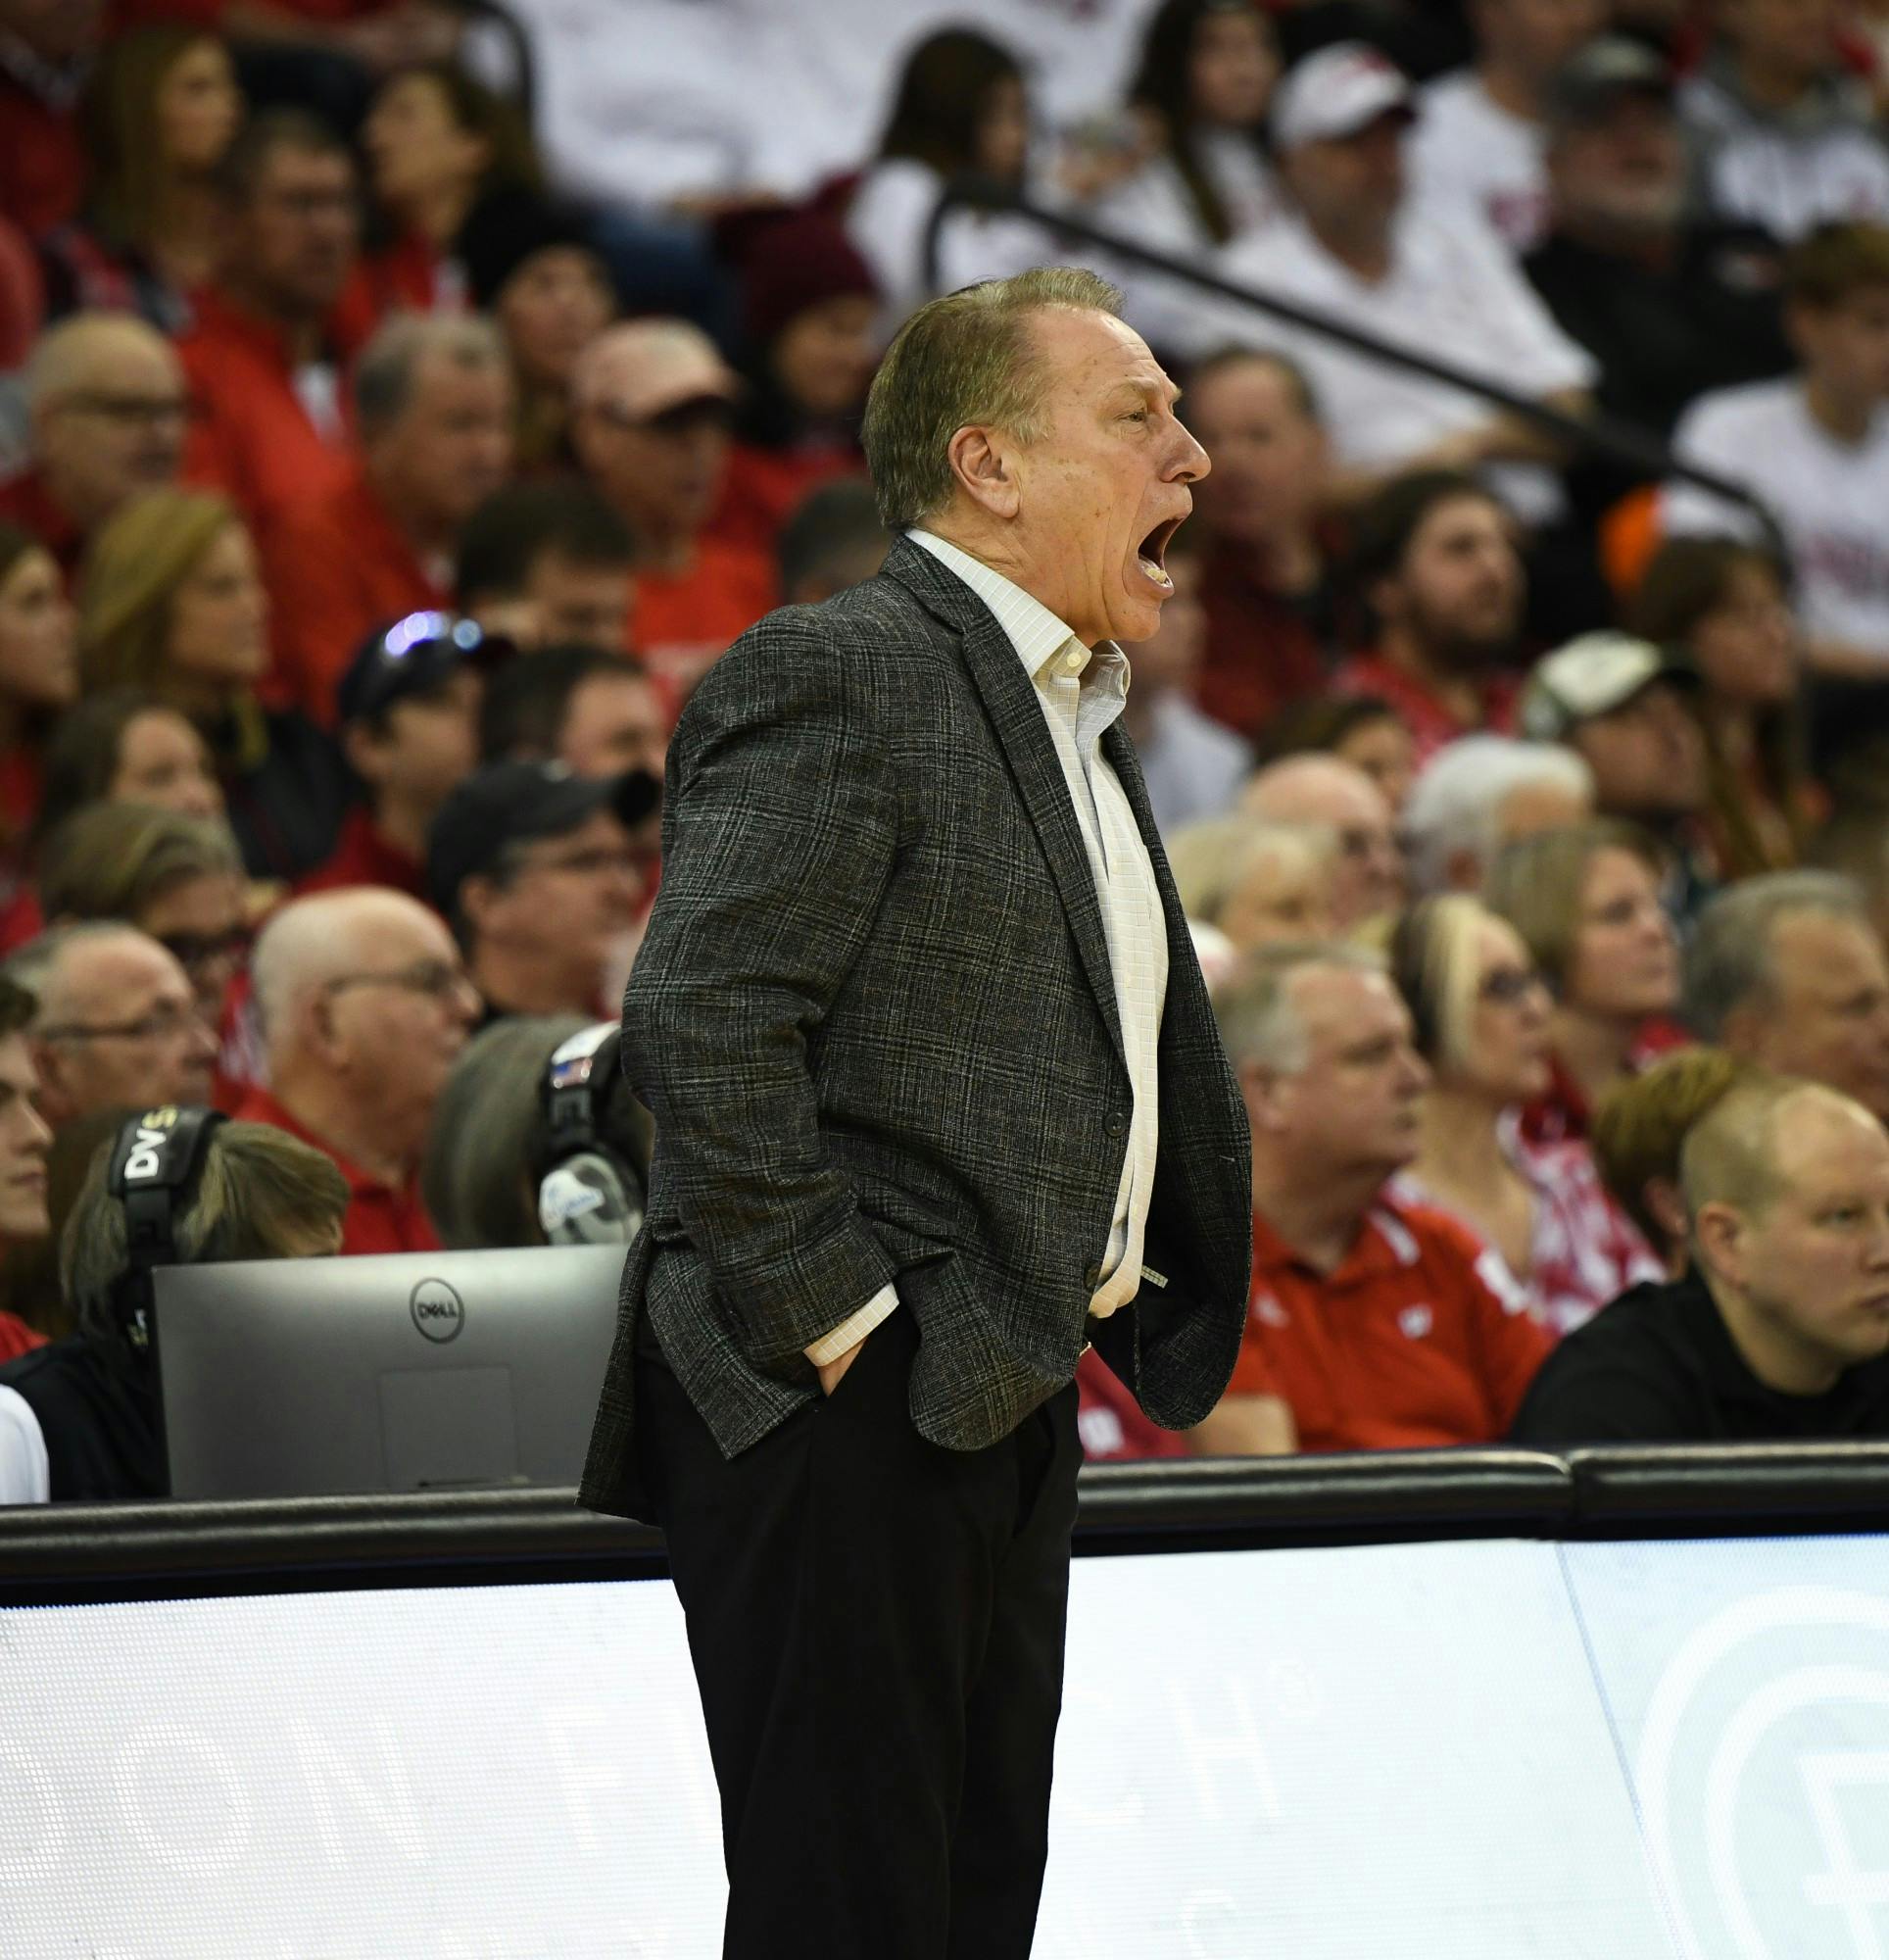 <p>MSU Men&#x27;s Basketball Head Coach Tom Izzo yells at the team during the basketball game against Wisconsin on Feb. 1, 2020 at the Kohl Center in Madison, Wisconsin. The Spartans fell to the Badgers, 63-64.</p>